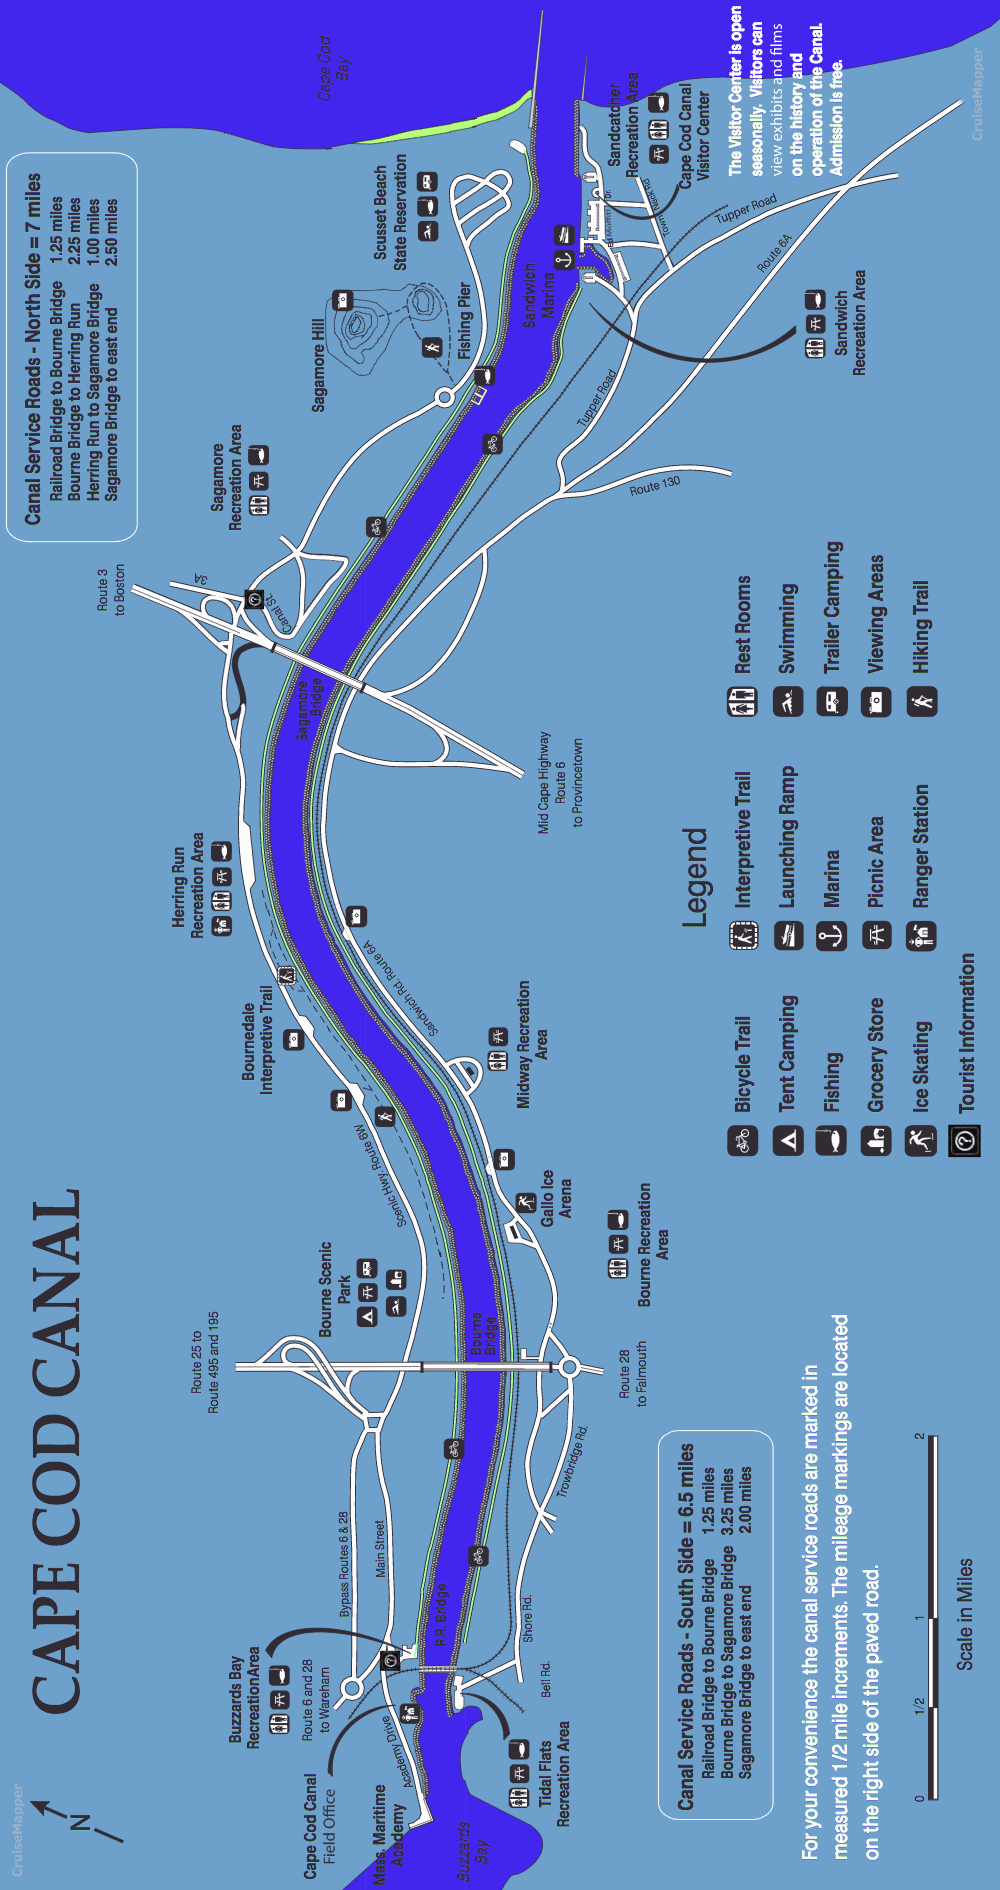 Cape Cod Canal map